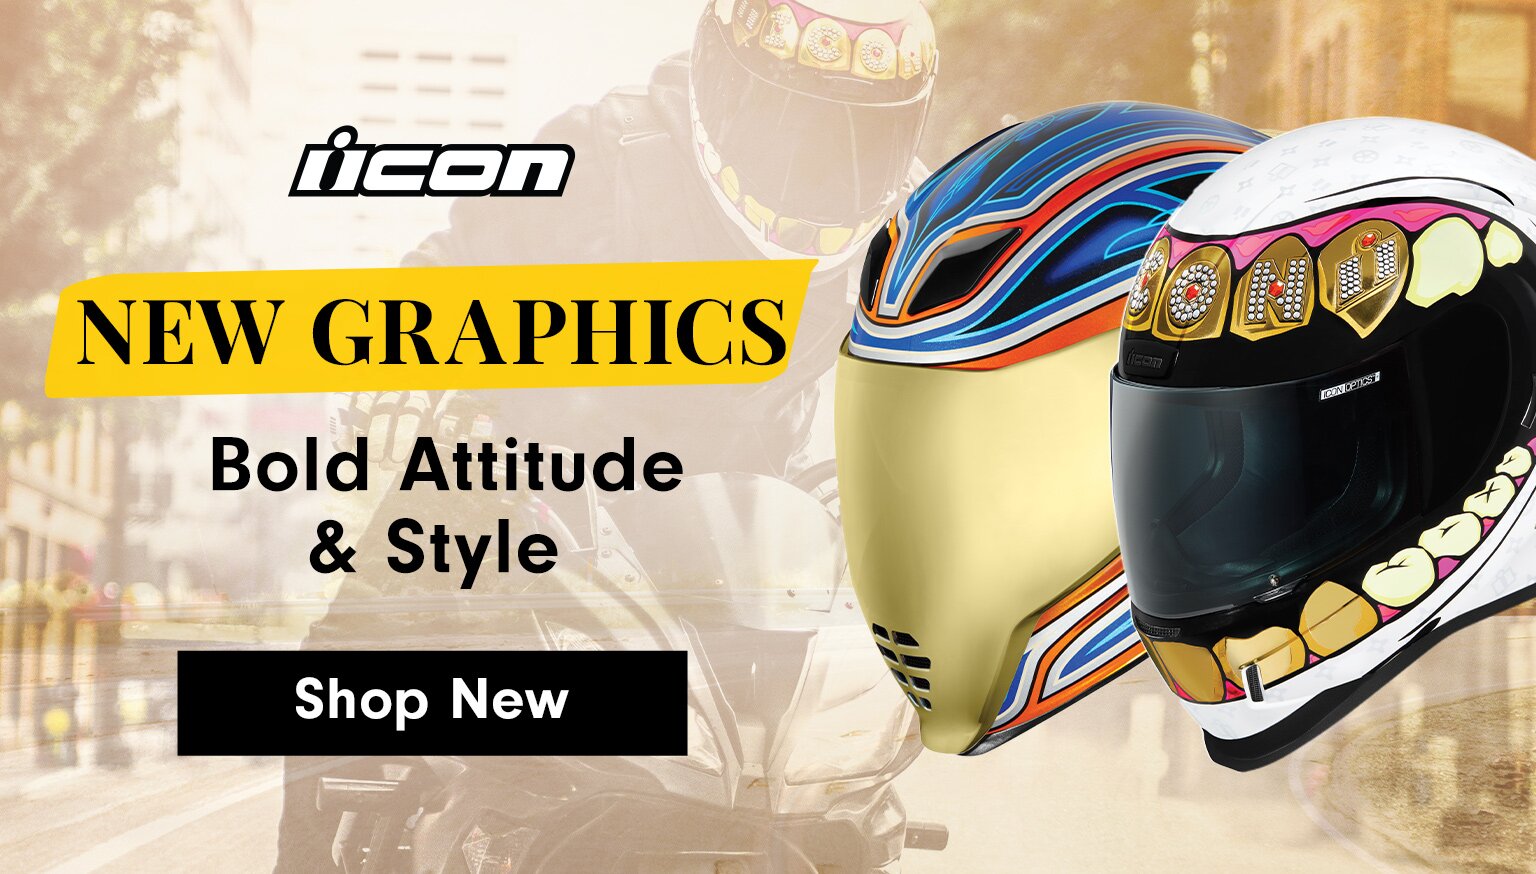 where can you buy motorcycle helmets